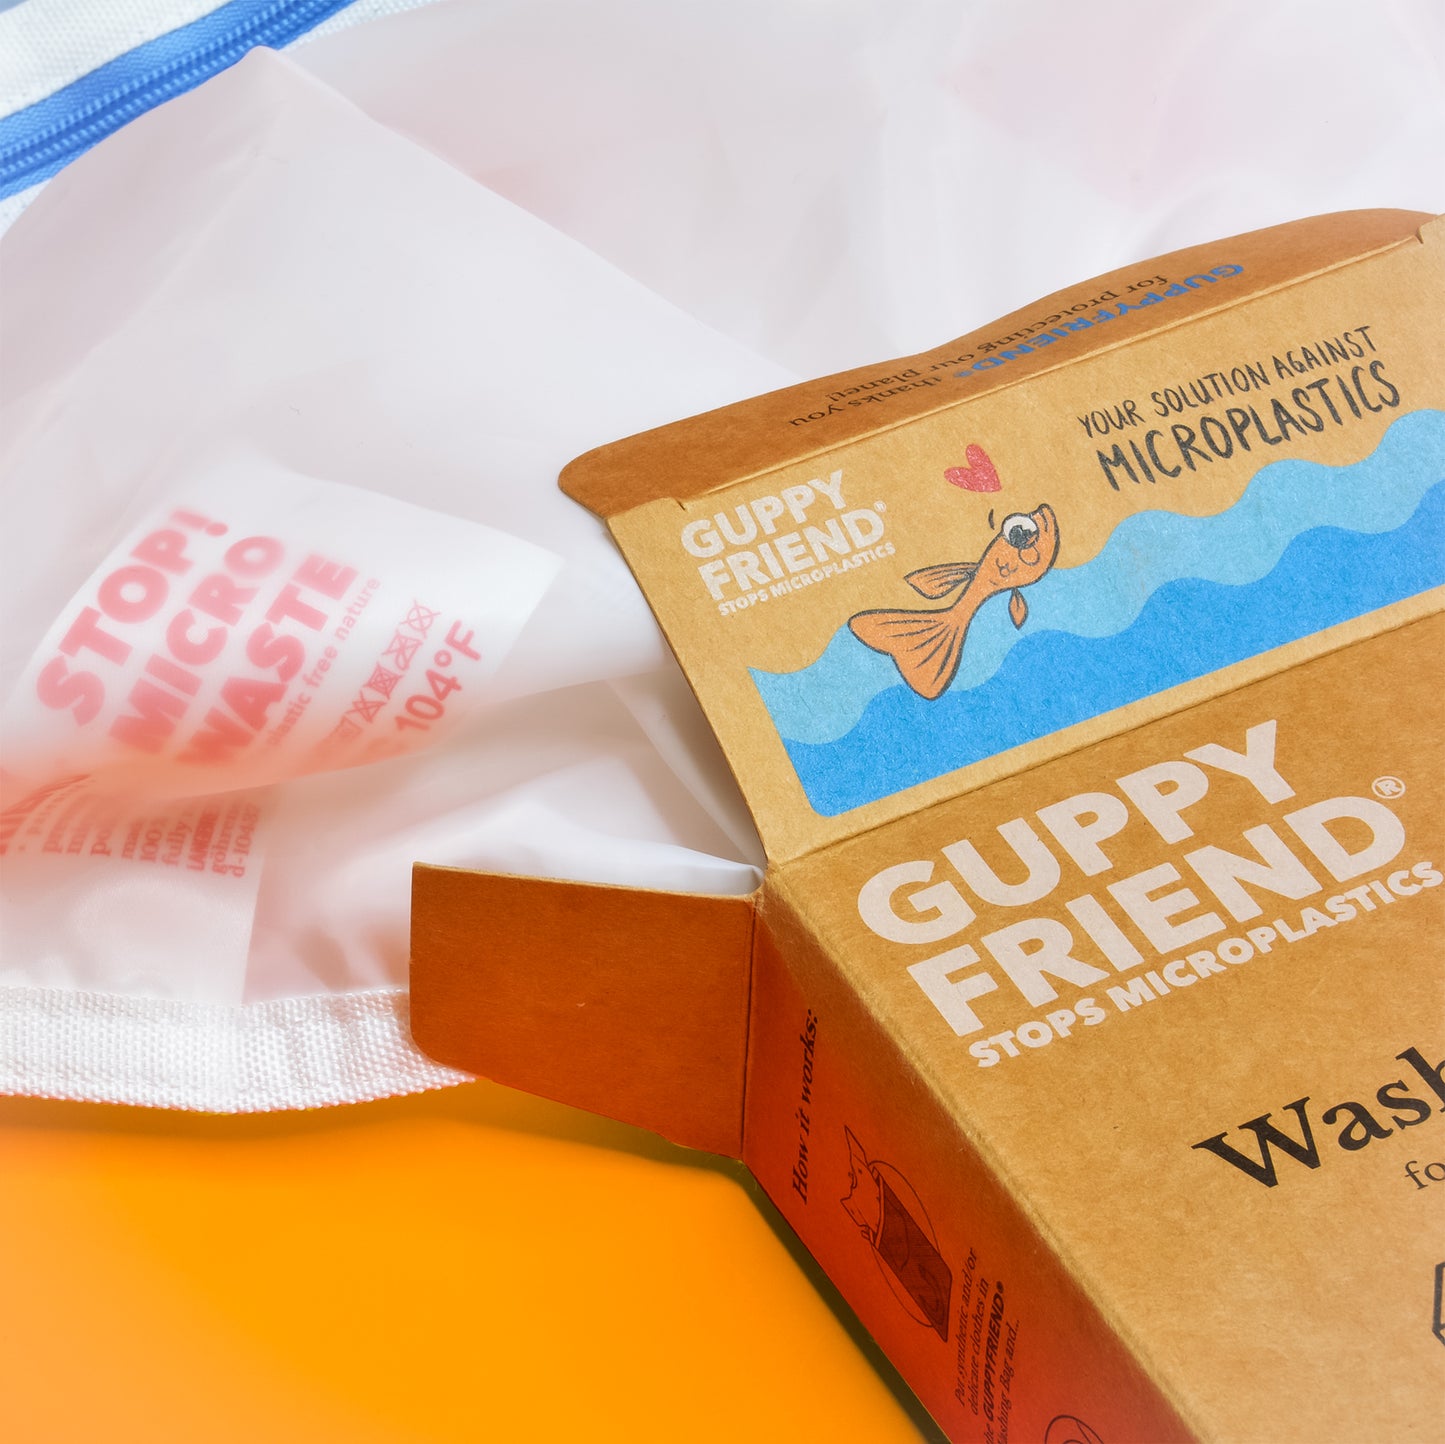 A close up of the Guppyfriend wash bag packaging stamped with the words "your solution against microplastics"